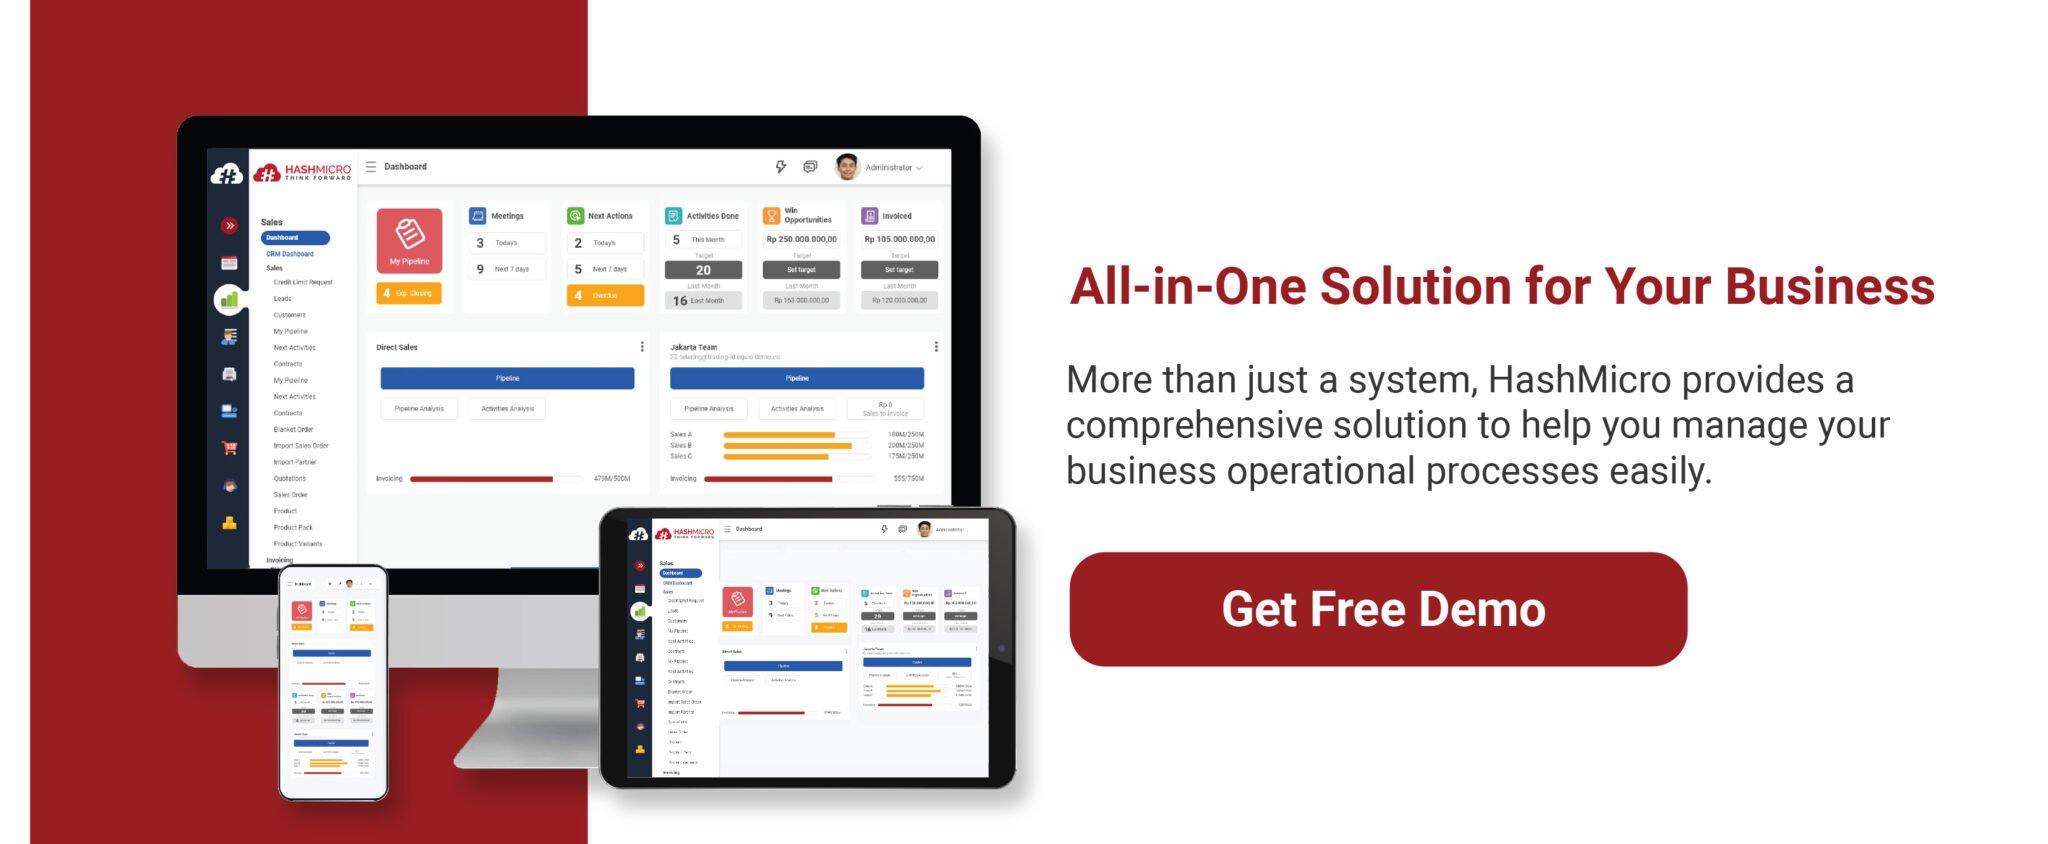 all-in-one your business solution (https://www.hashmicro.com/free-product-tour/)